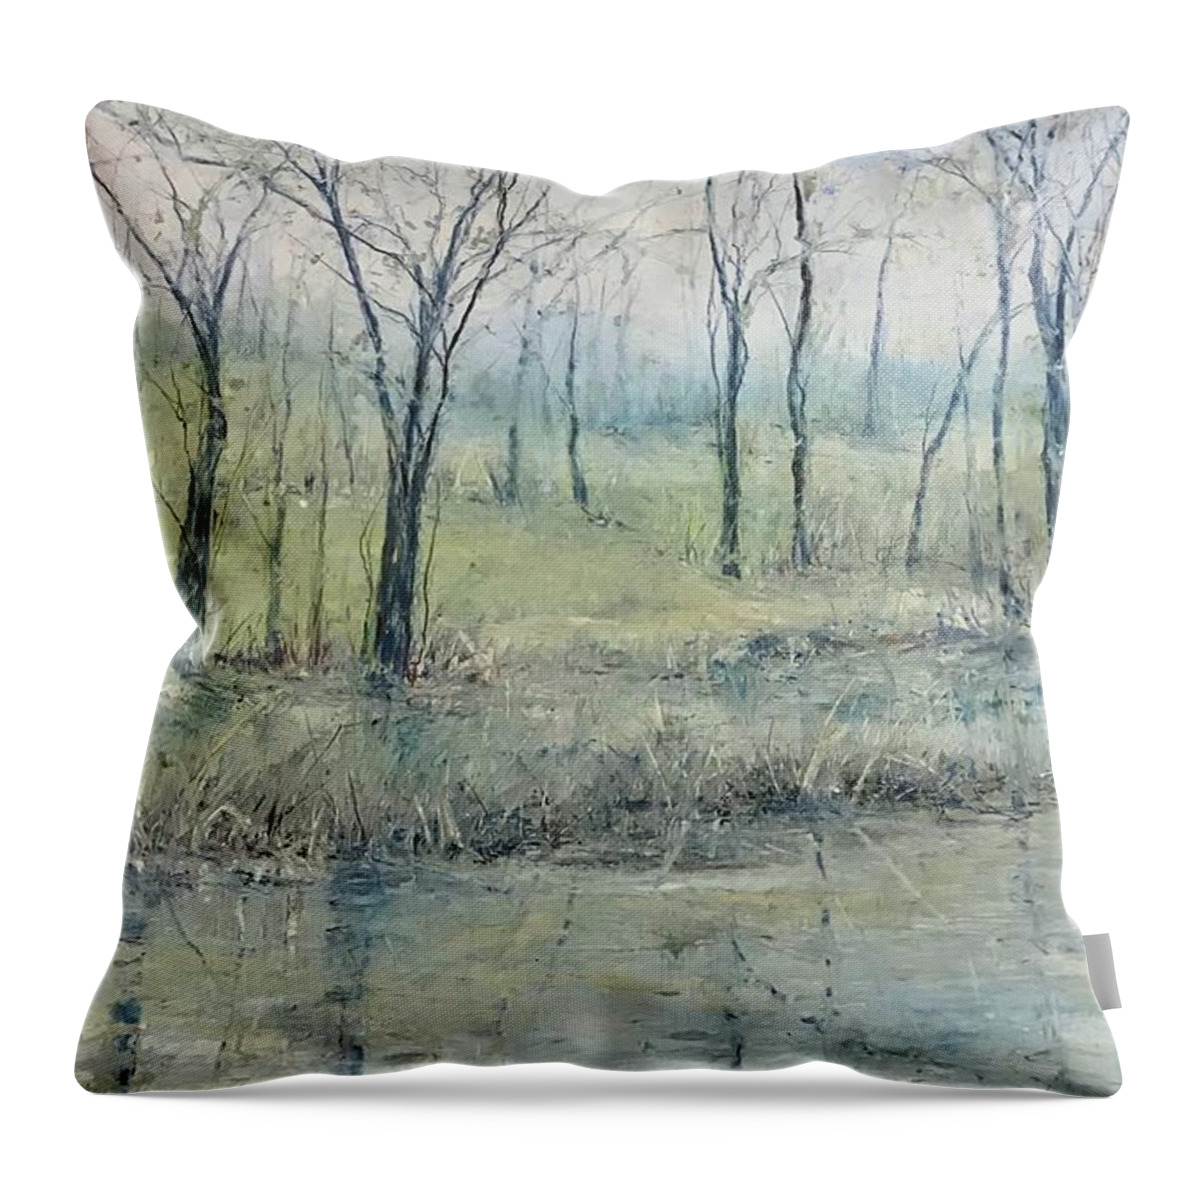  Throw Pillow featuring the painting Untitled #3 by Robin Miller-Bookhout